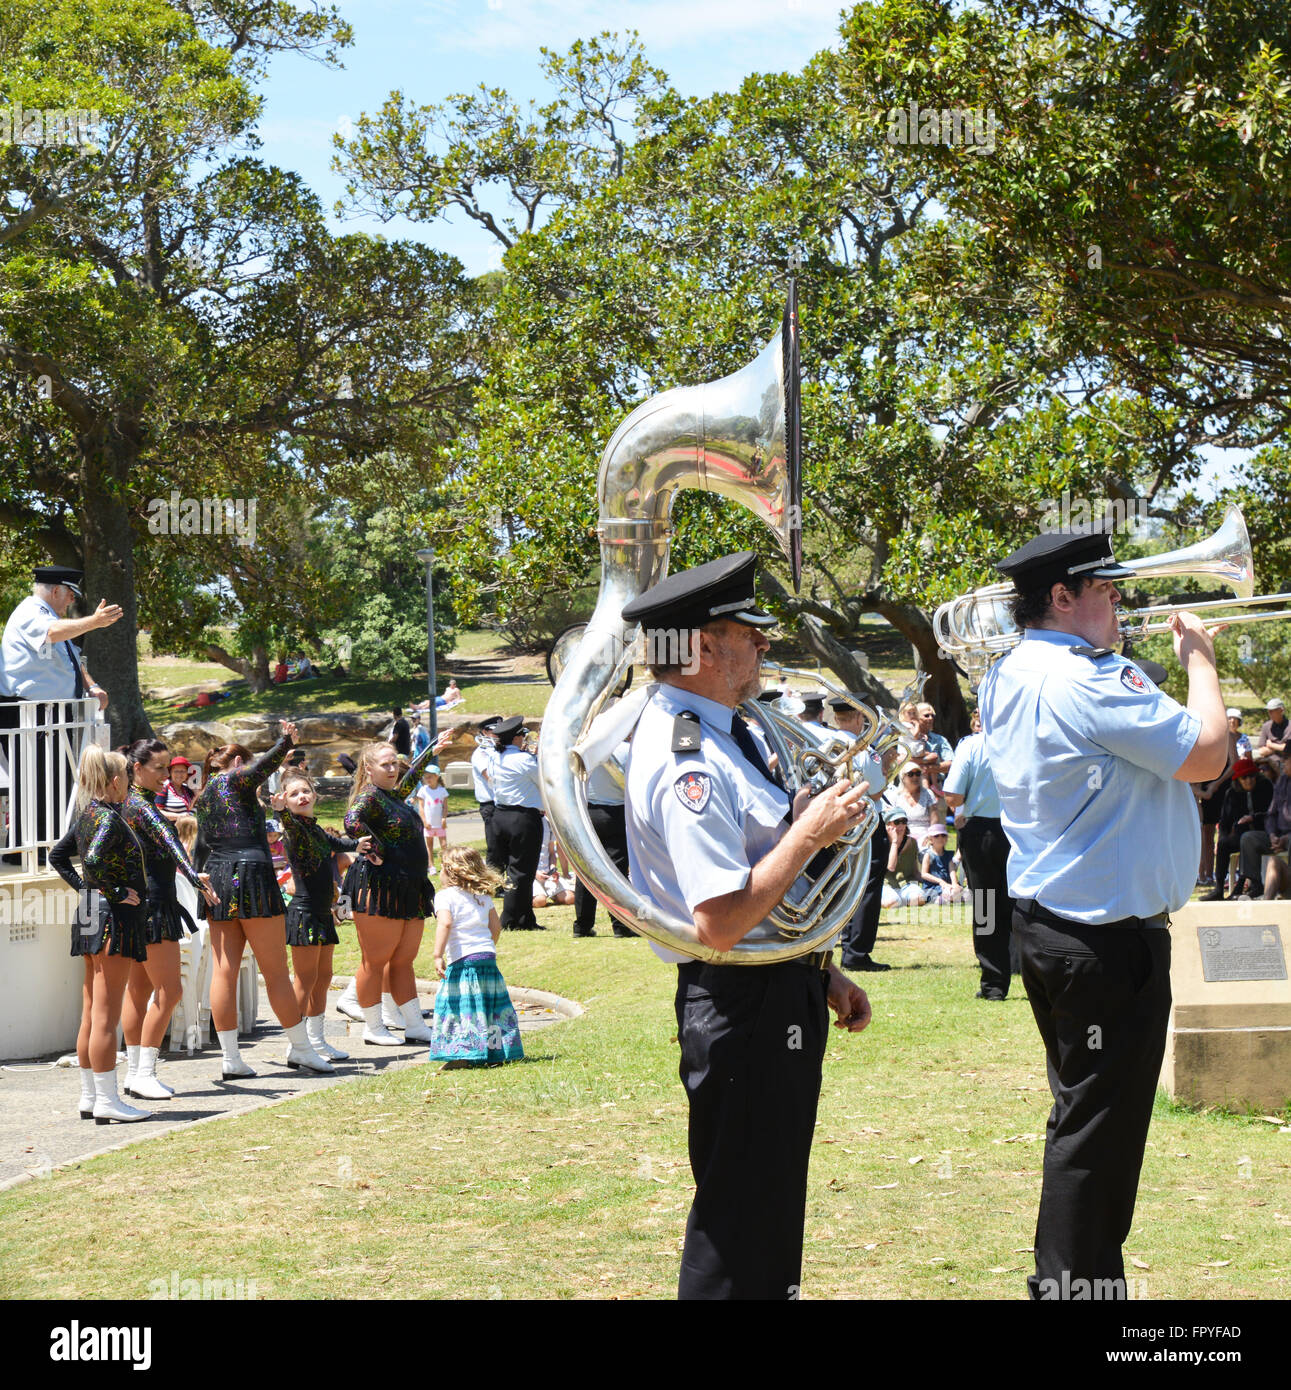 NSW Fire & Rescue Band on Sydney Beach, Sydney Australia. People enjoying a day out on the beach with the band playing. Stock Photo